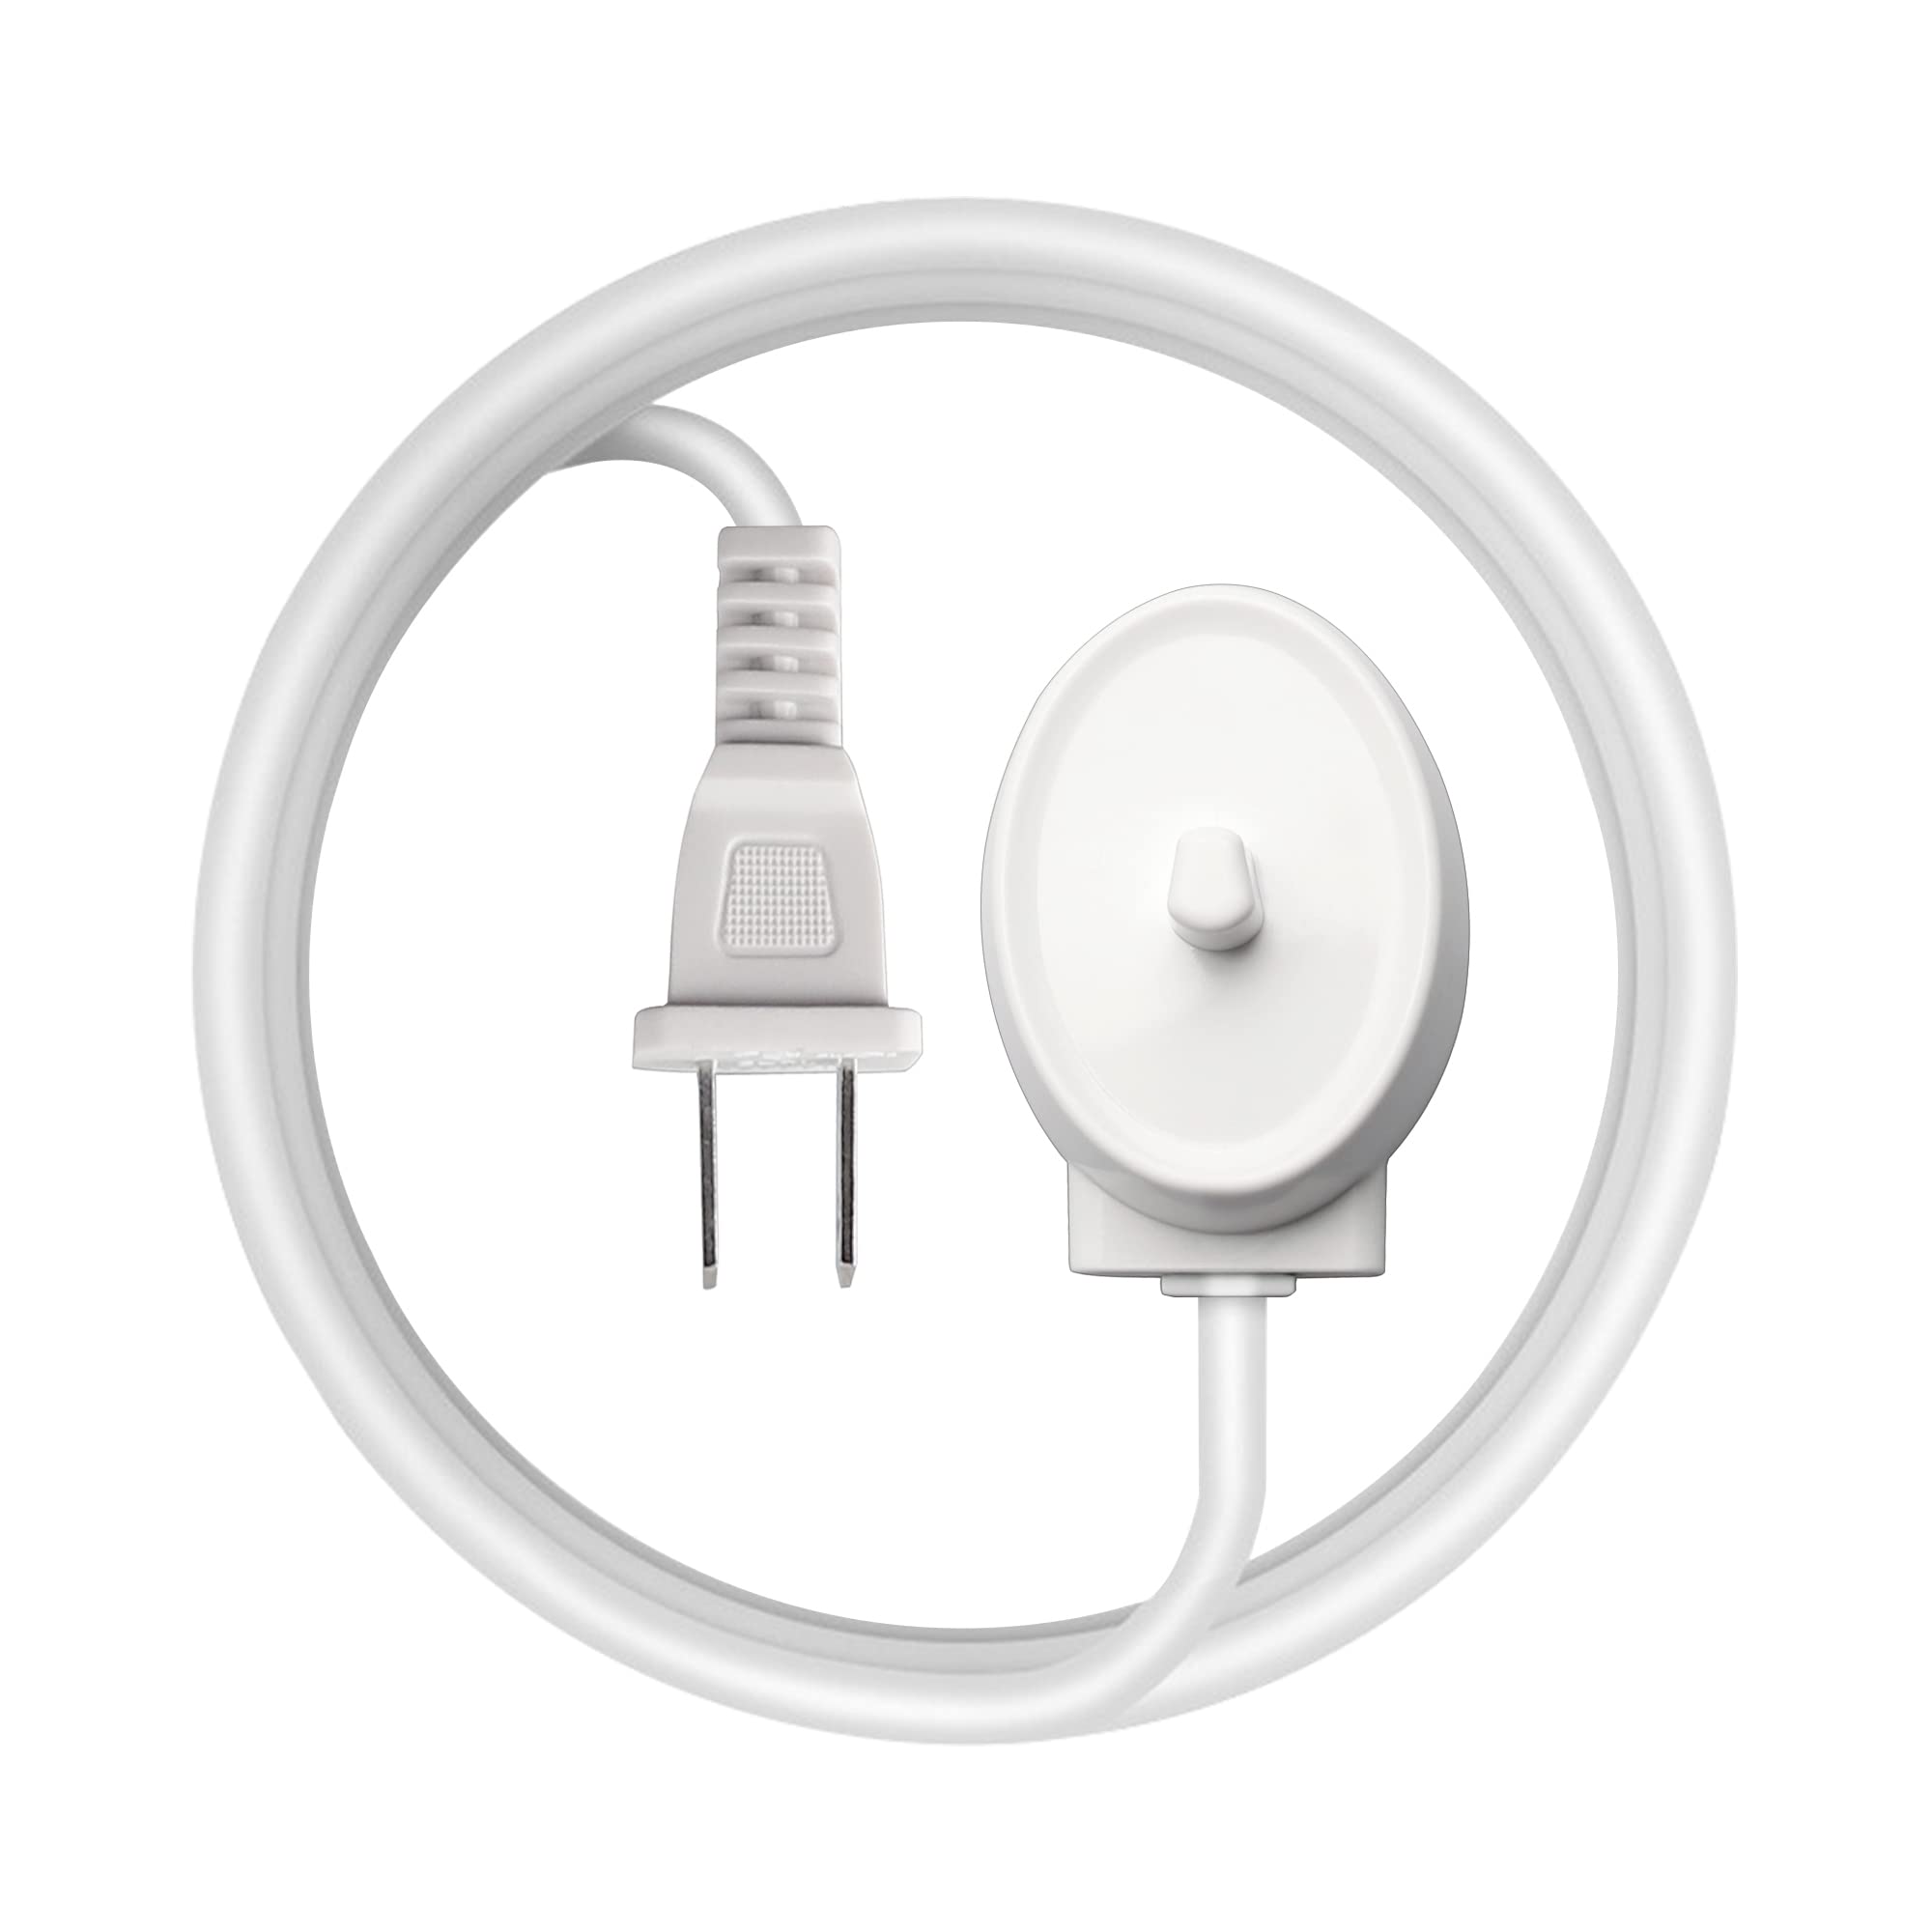 BXIZXD Electric Toothbrush Charger Replacement India